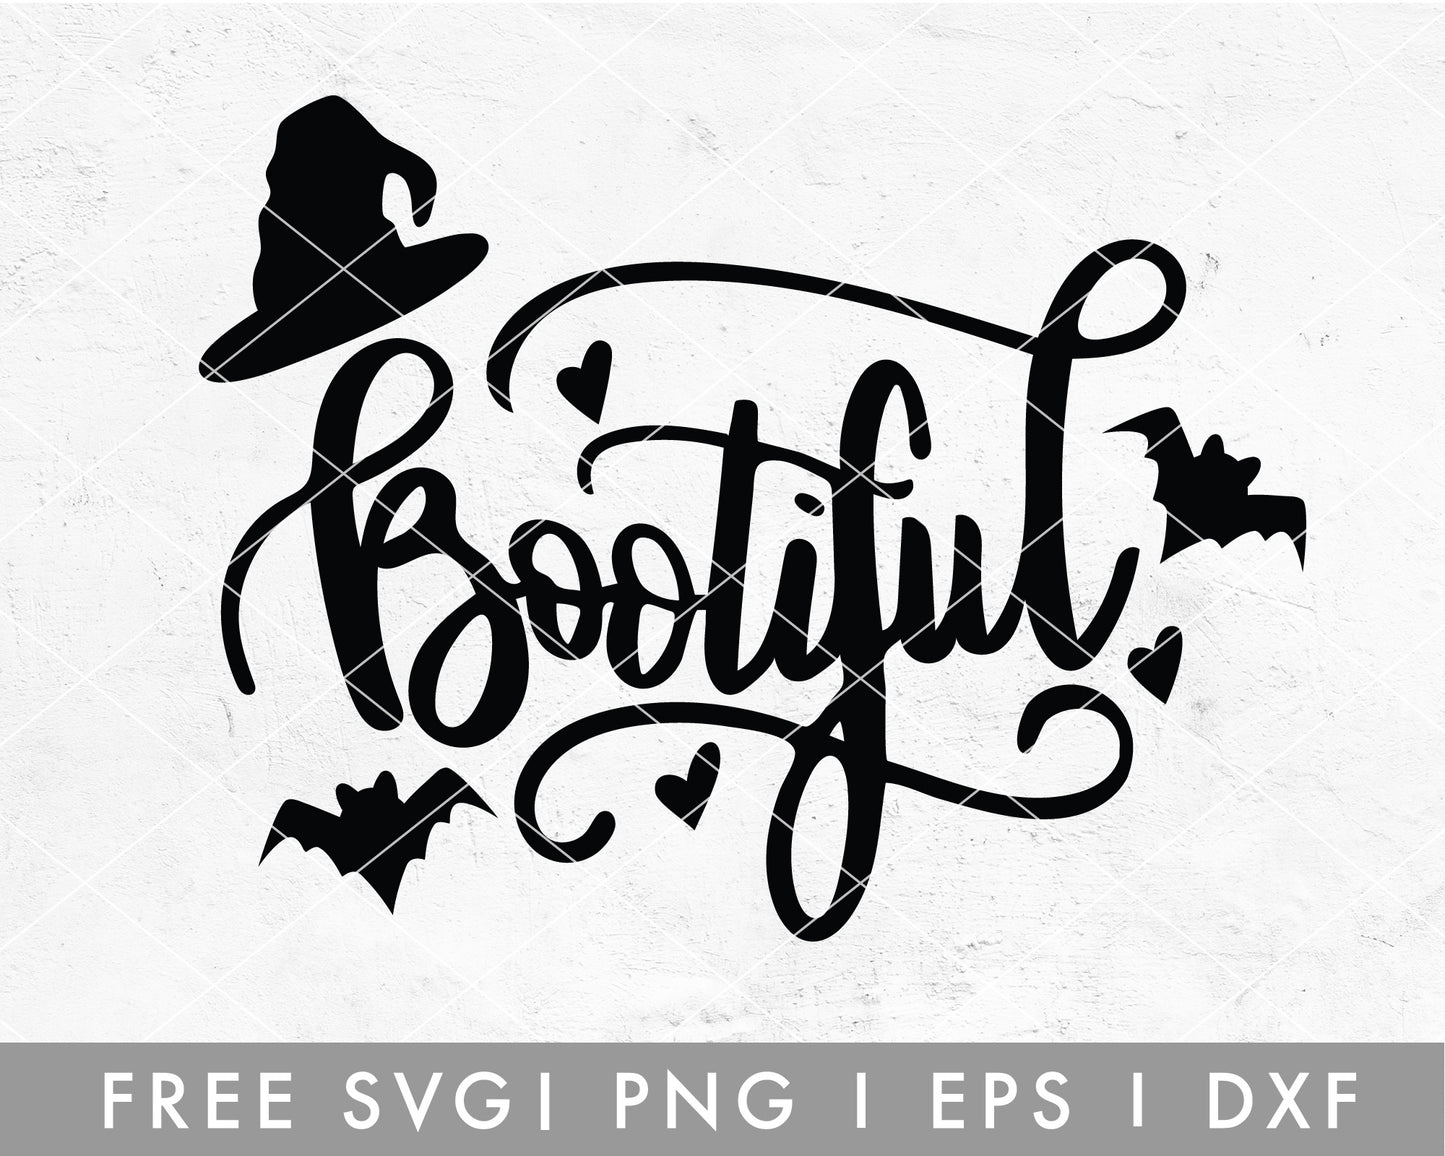 FREE I Put a Spell On You SVG Cut File for Cricut, Cameo Silhouette